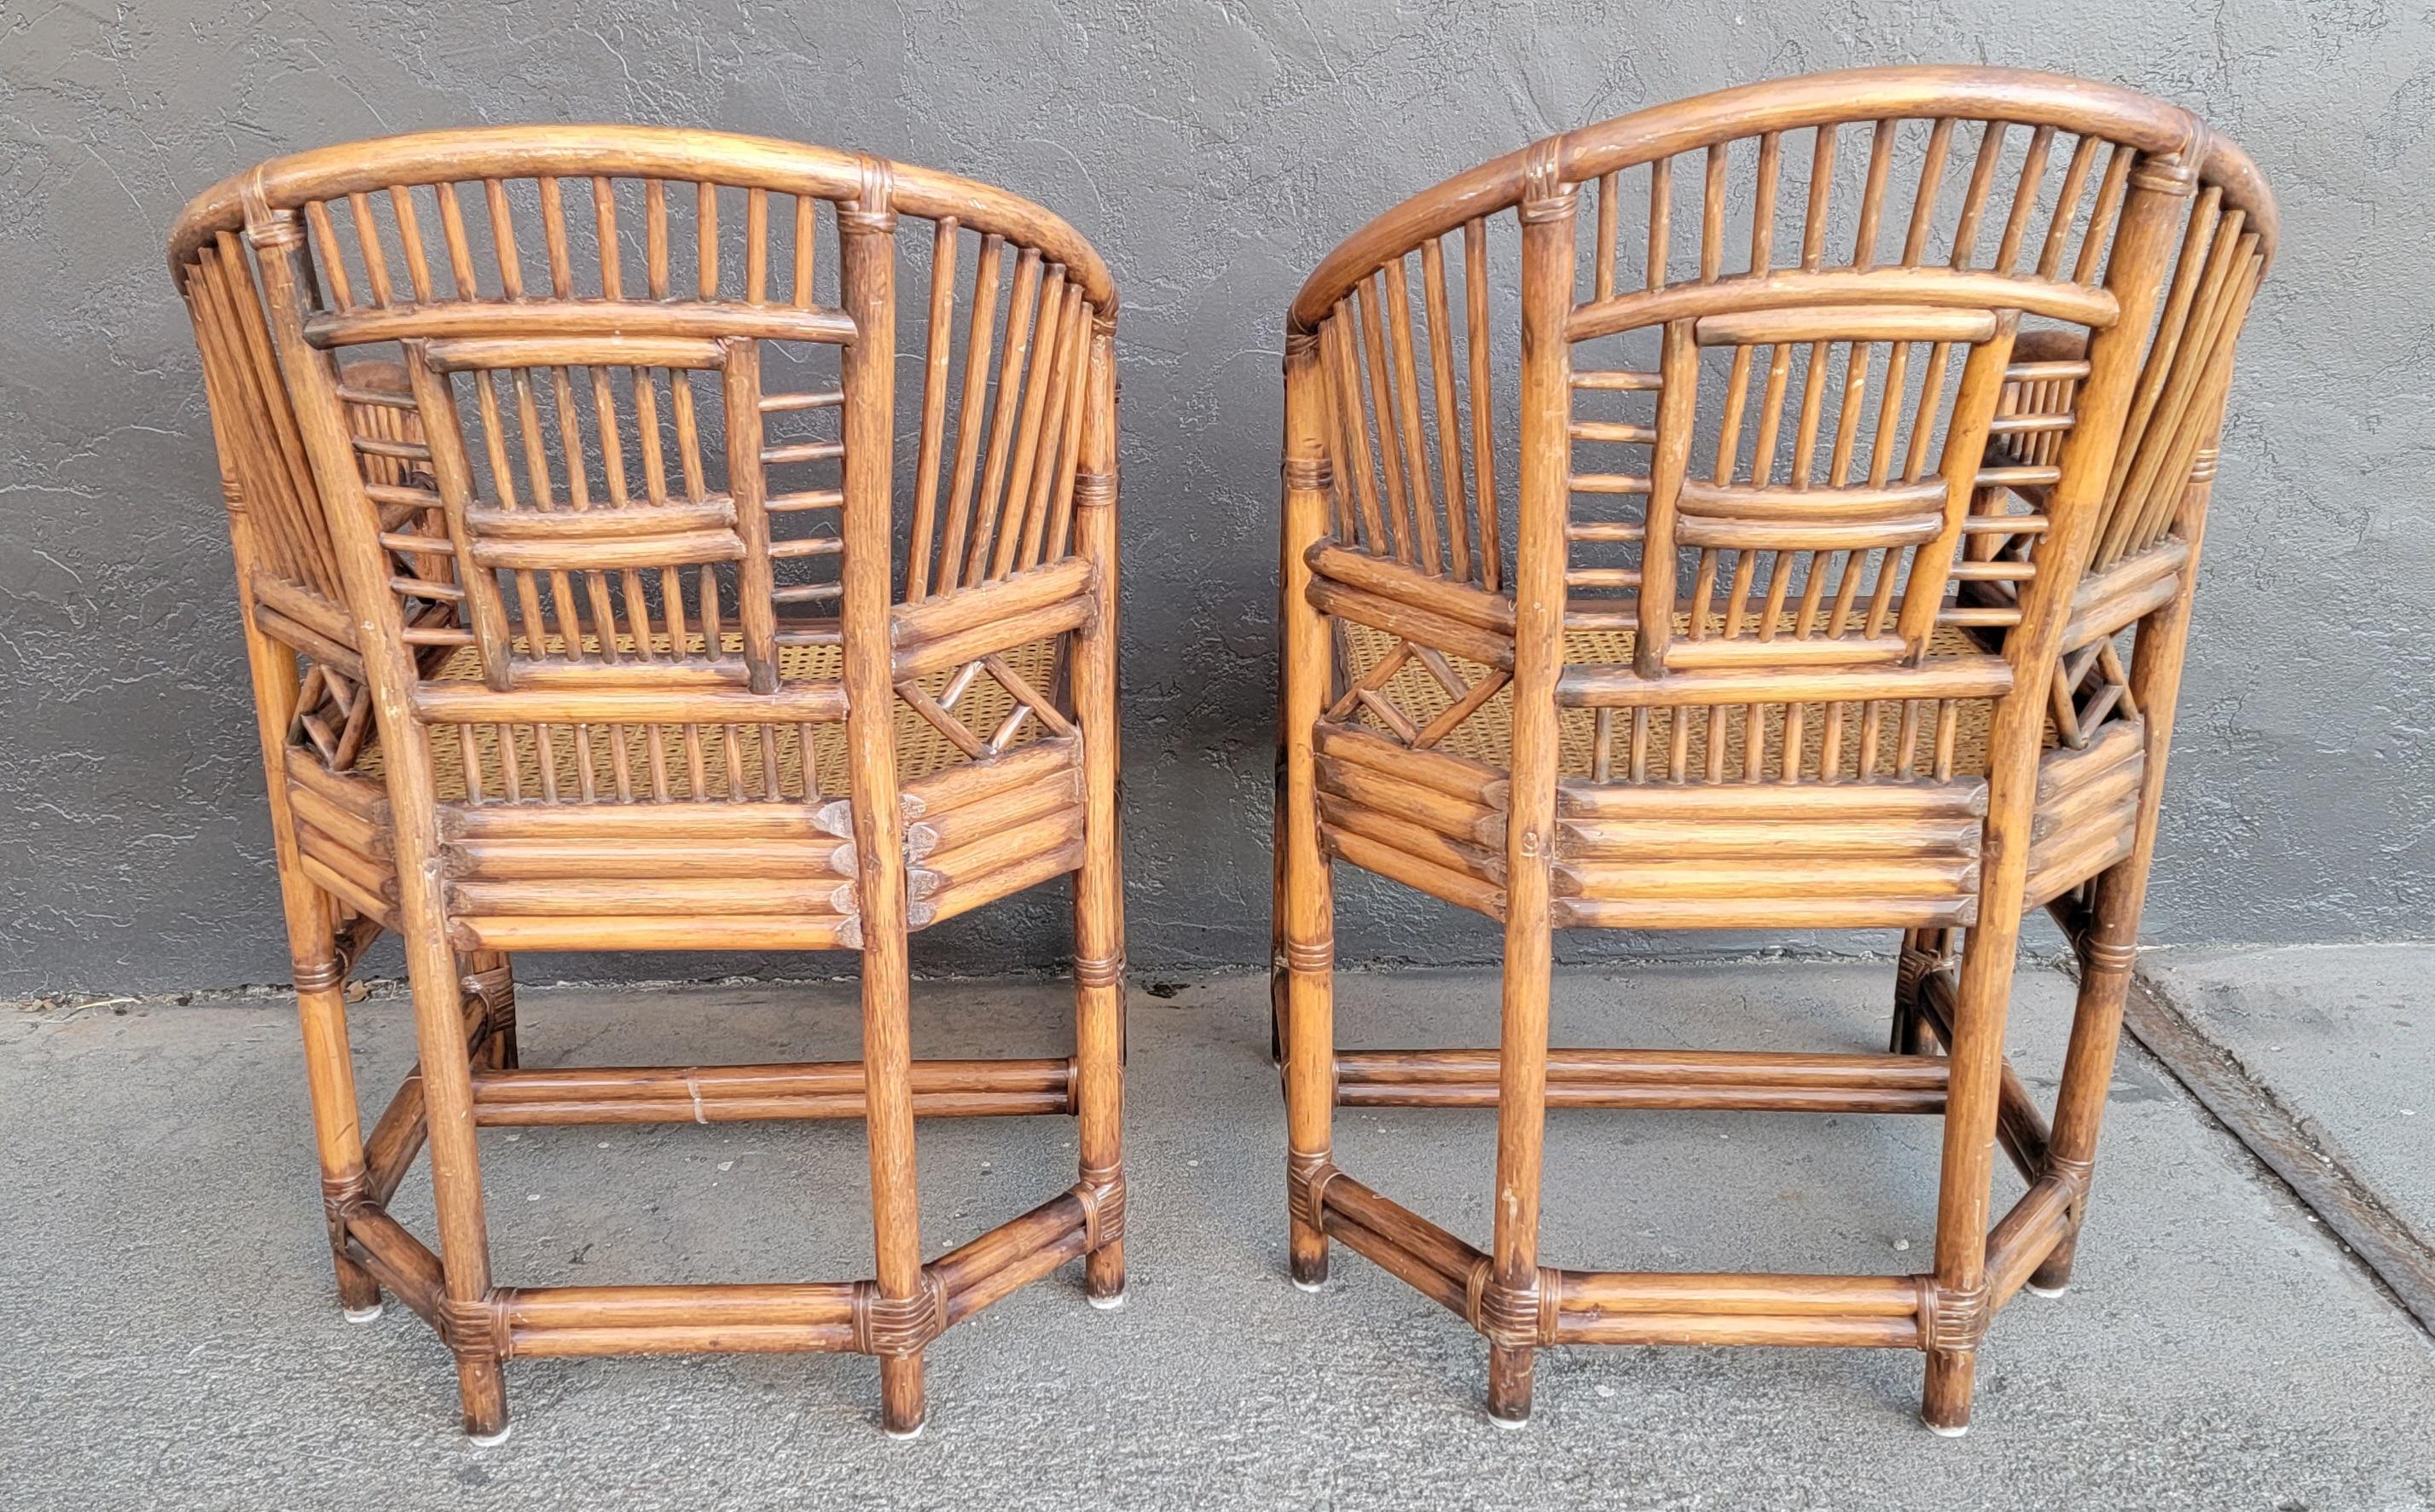 Bamboo Lounge Chairs with Cane Seats 1